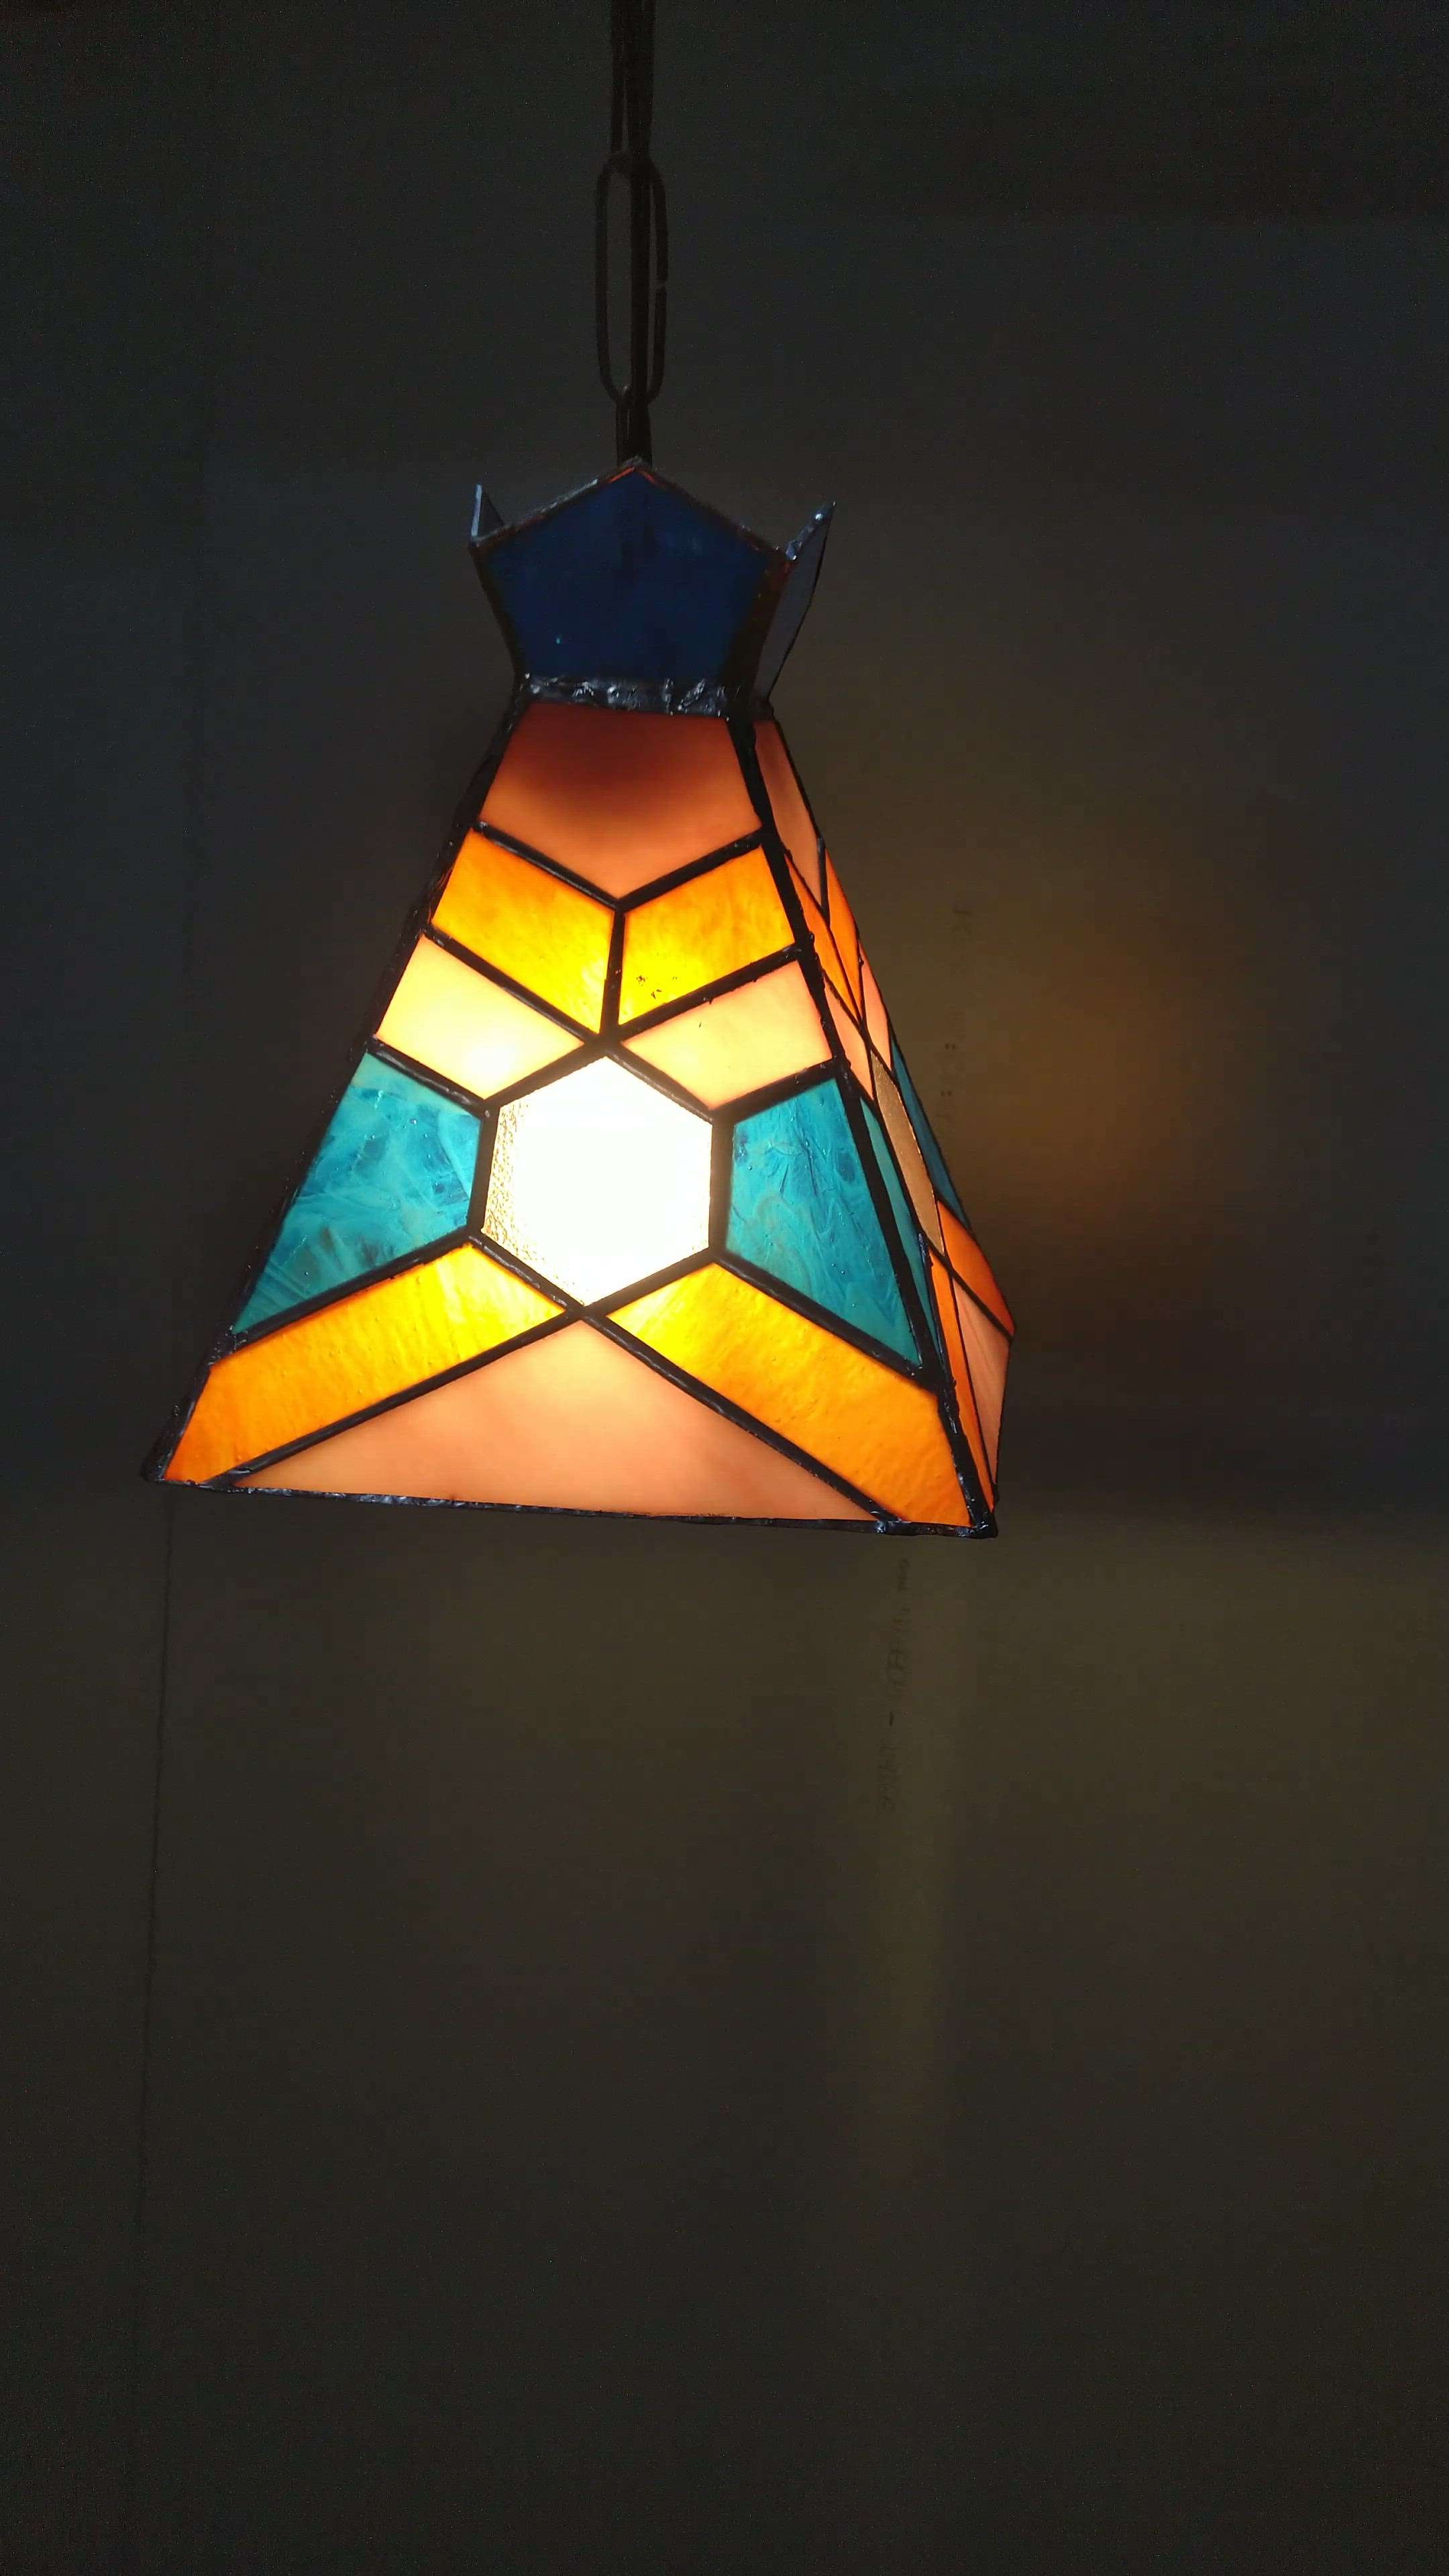 Stained glass Tiffany lamp shade
More enquiries please contact
Crizzle
IV/190, Industrial estate, Athani, Thrissur -680581
Ph : 9446444212, 487-2371973 , 8281172973
Email : crizzleinteriors@gmail.com 



 #InteriorDesigner  #lampshade  #HomeDecor